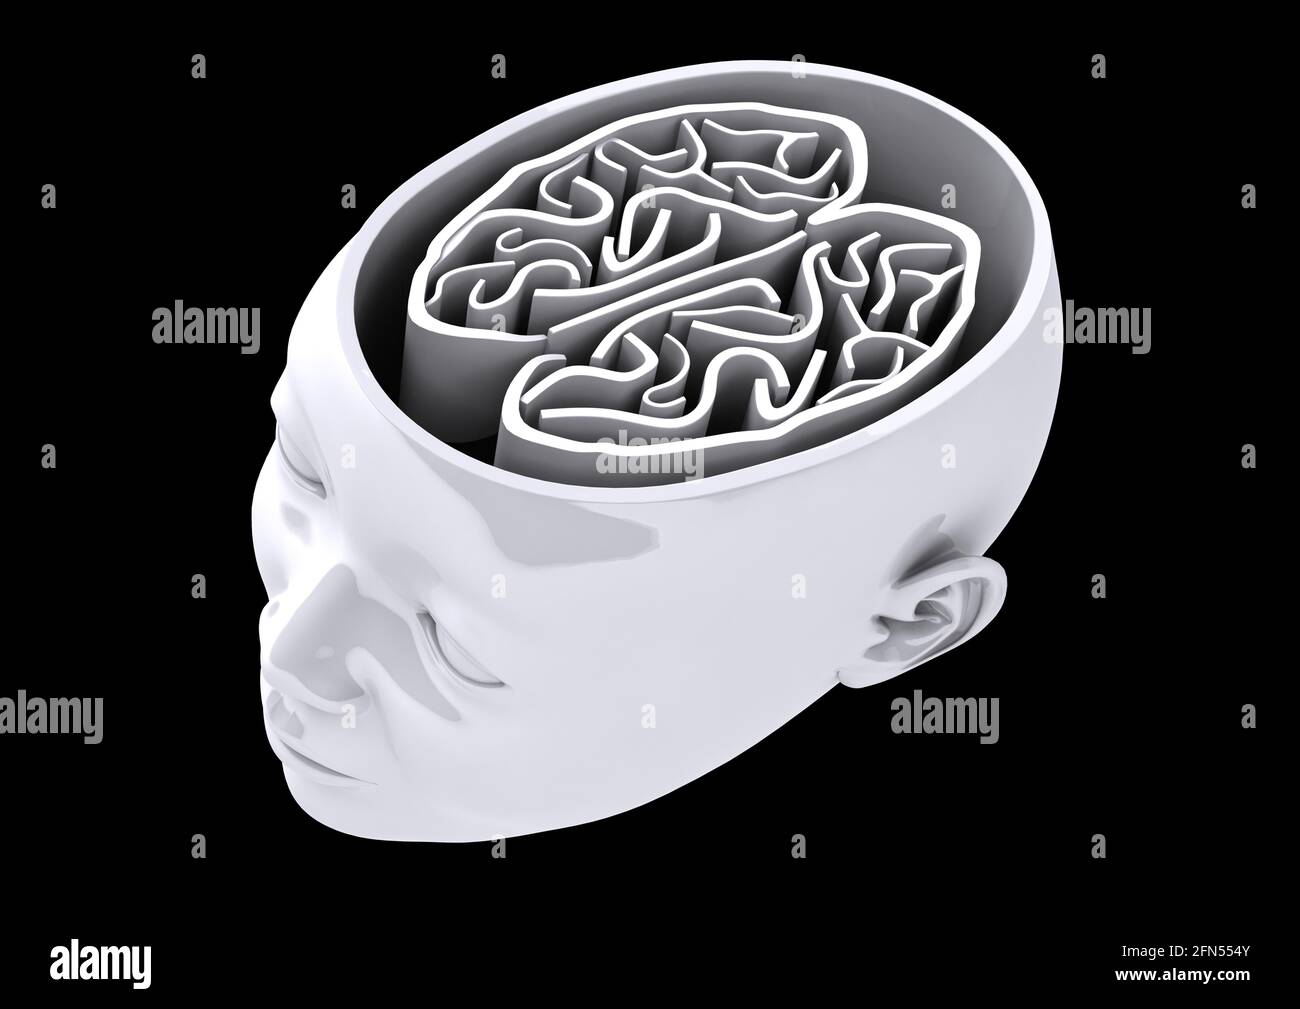 Illustration of grey human head with visible brain on black background Stock Photo